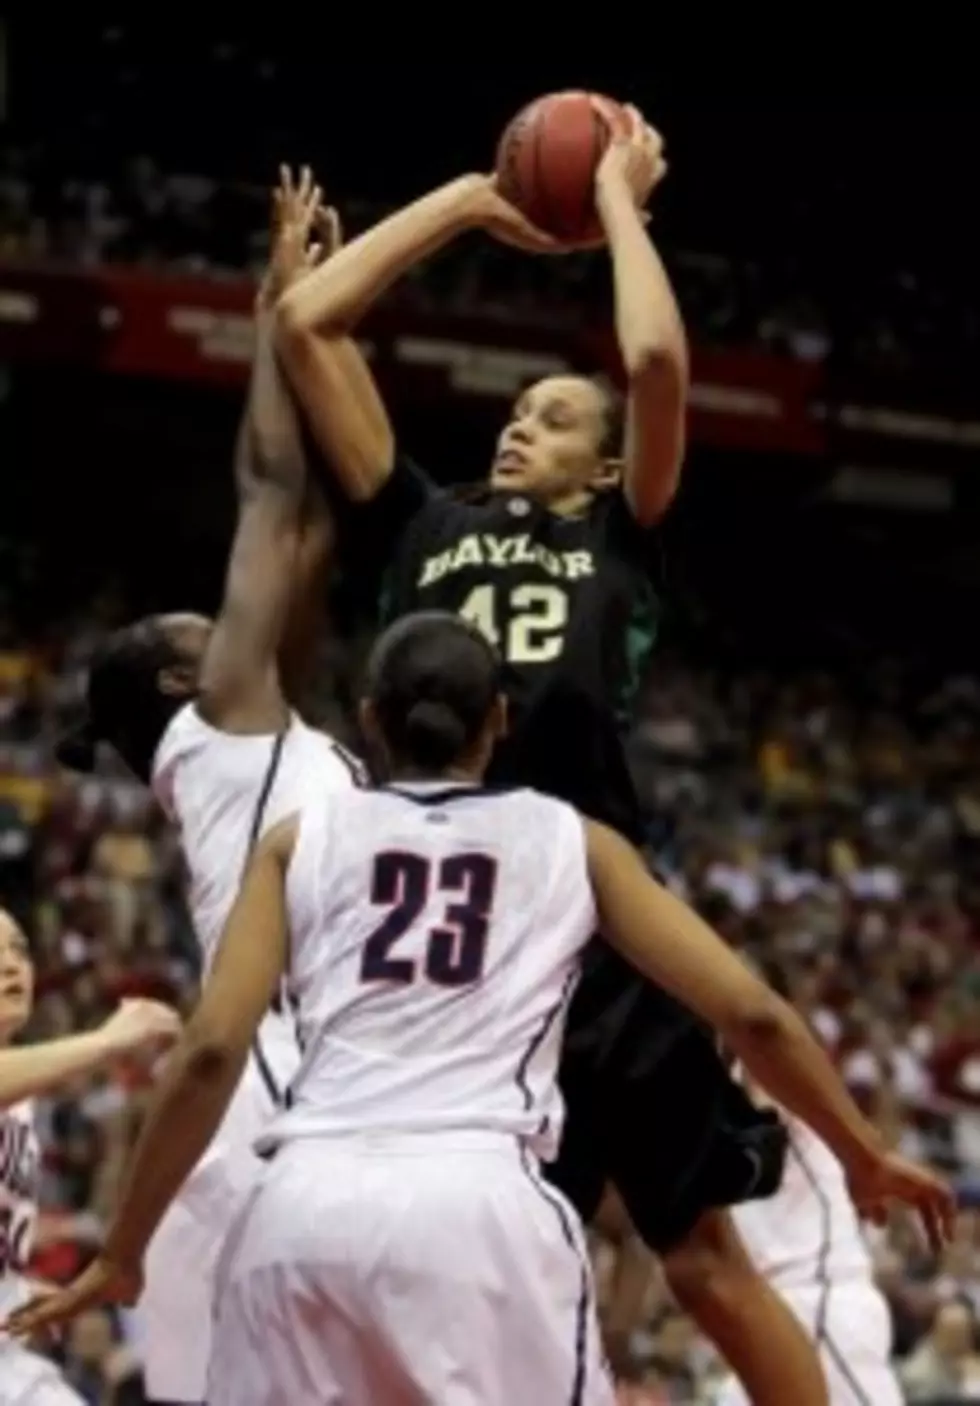 Lady Raiders Look to K.O. Top Ranked Baylor [VIDEO]